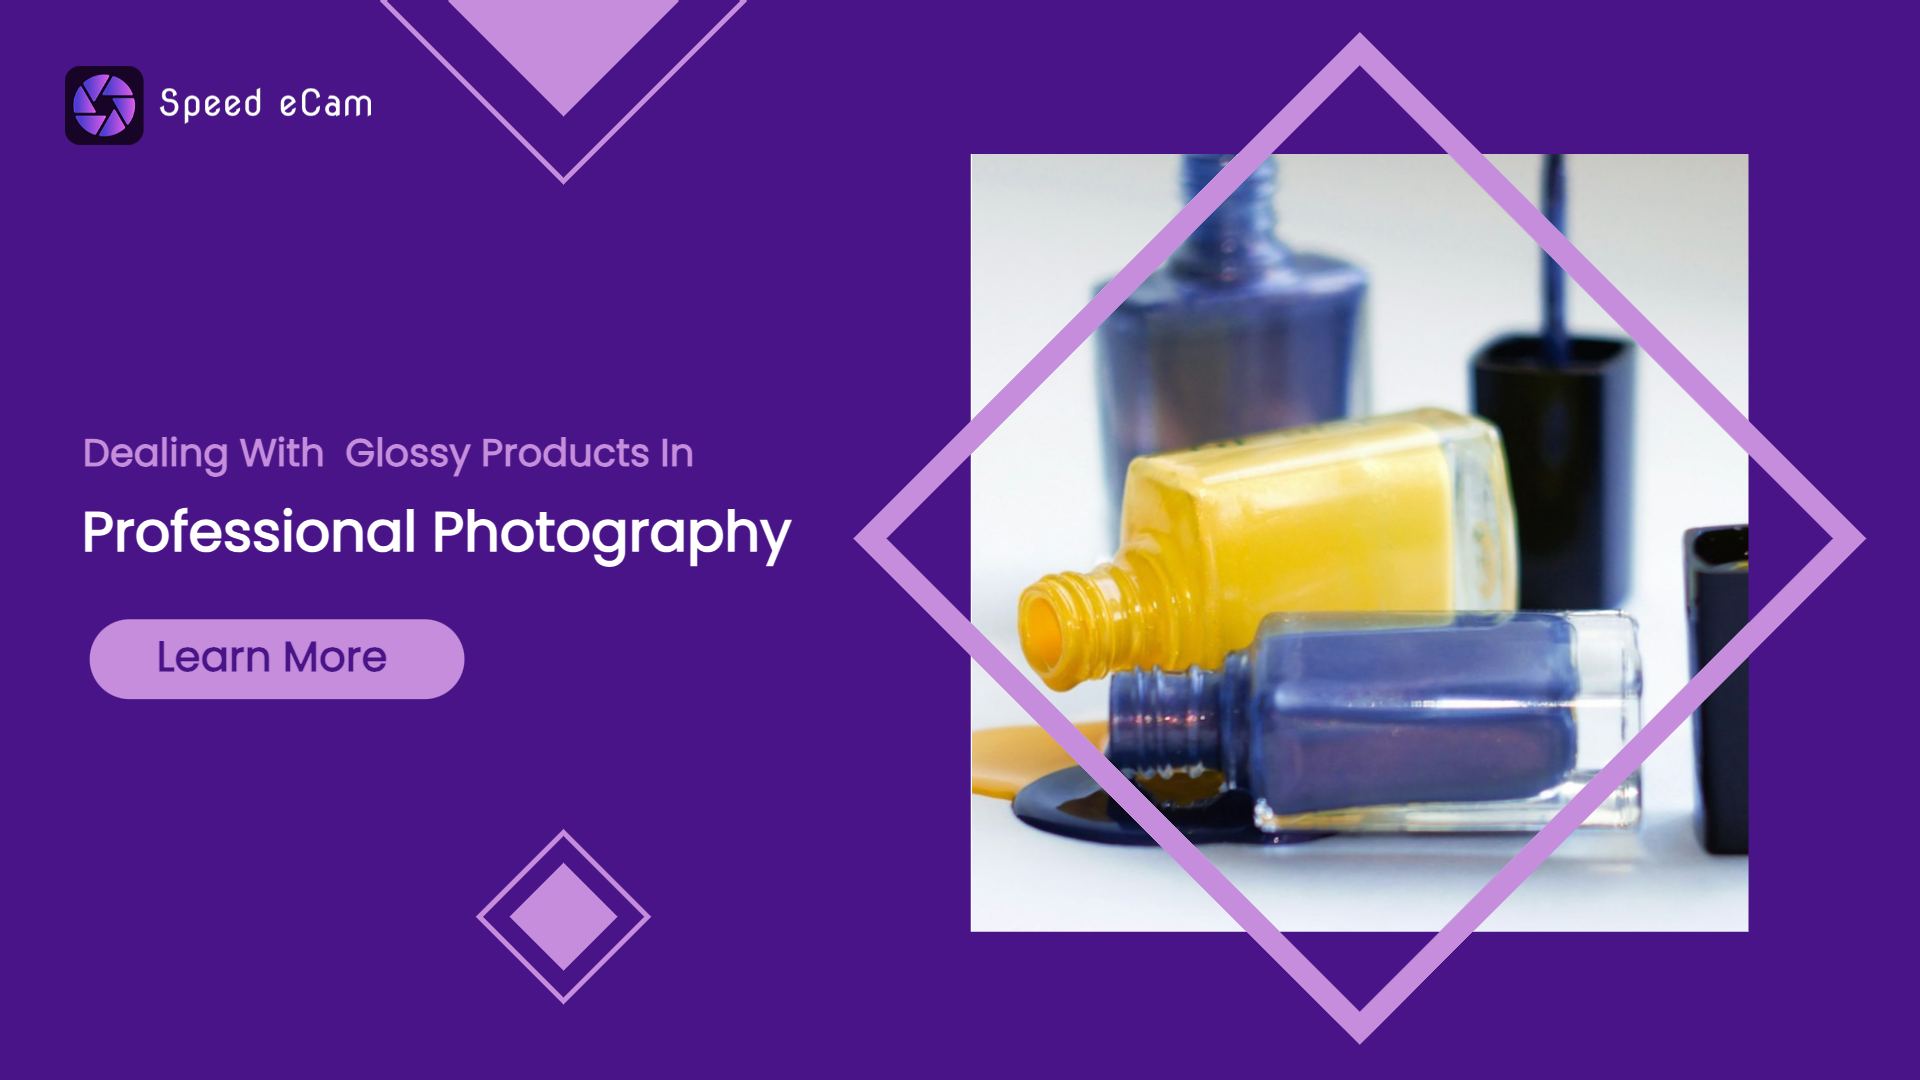 Dealing with Glossy Products in Professional Photography